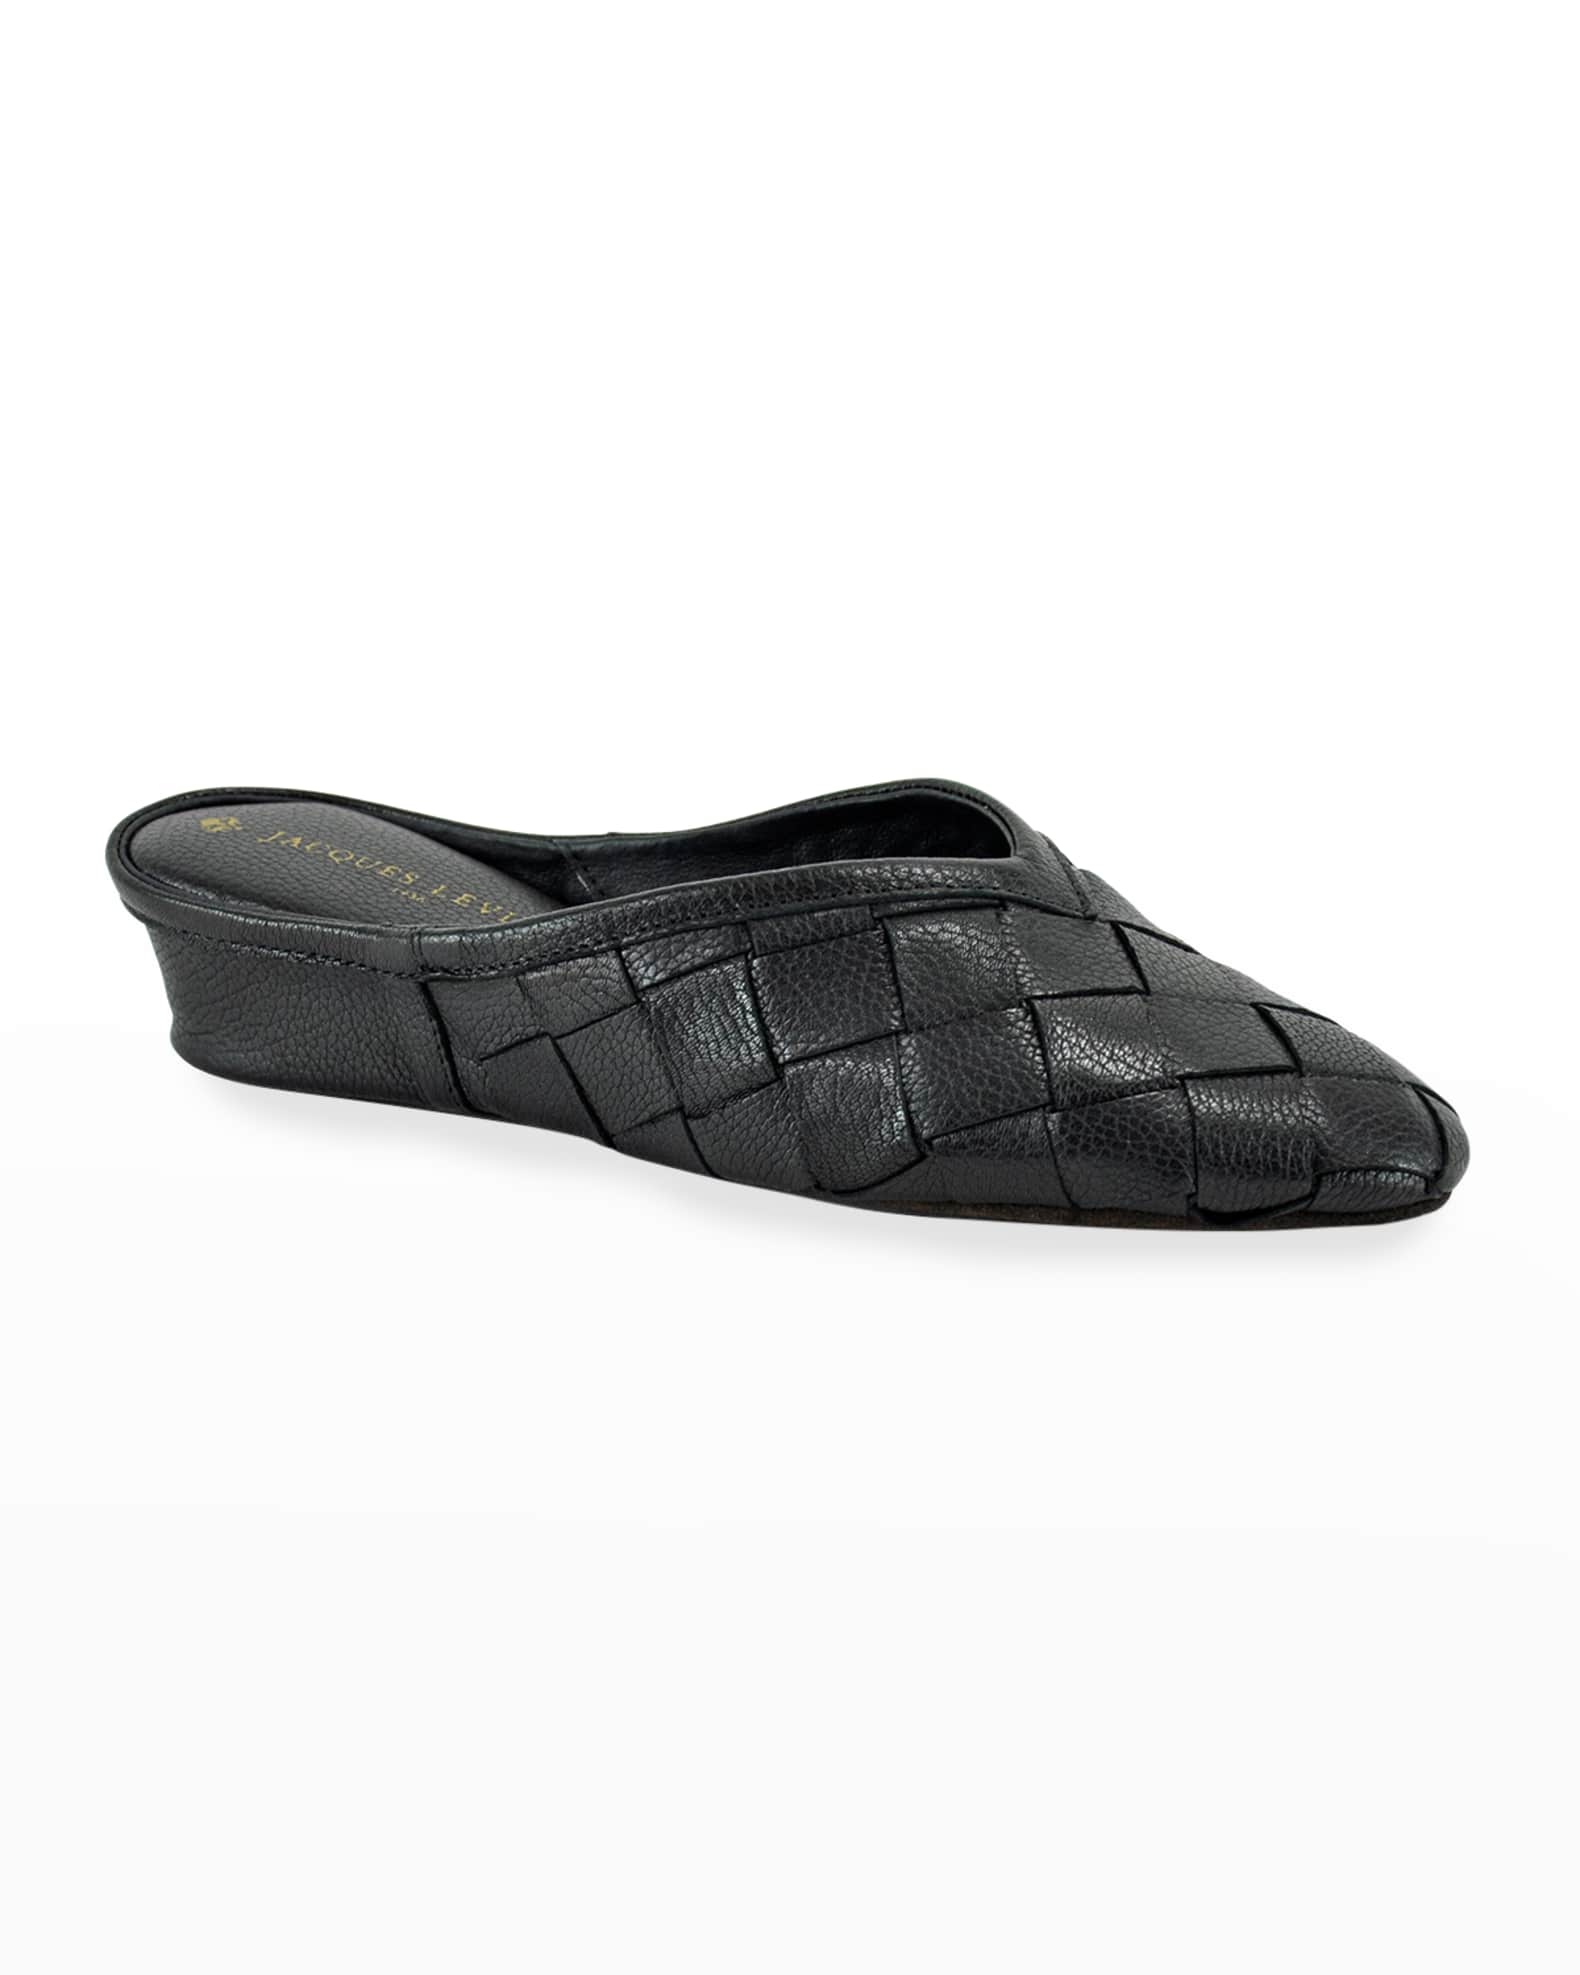 Jacques Levine Woven Leather Slipper